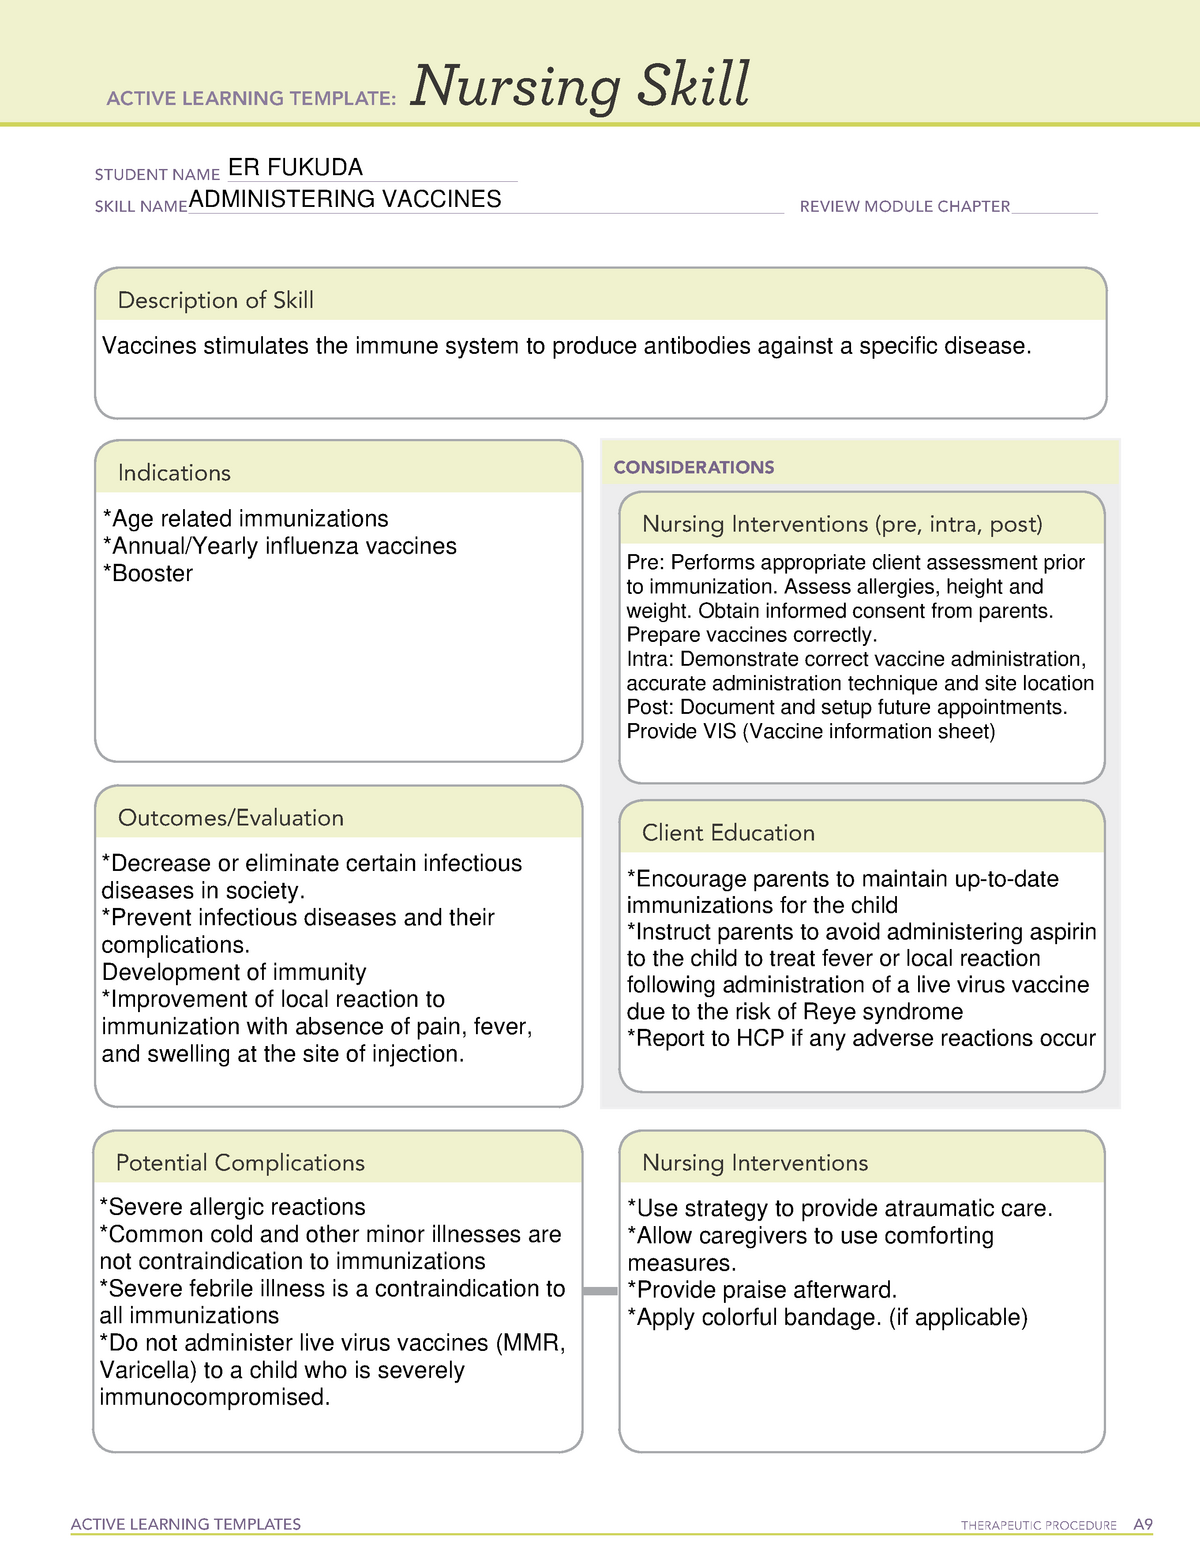 ati-active-learning-nursing-skill-active-learning-template-nursing-images